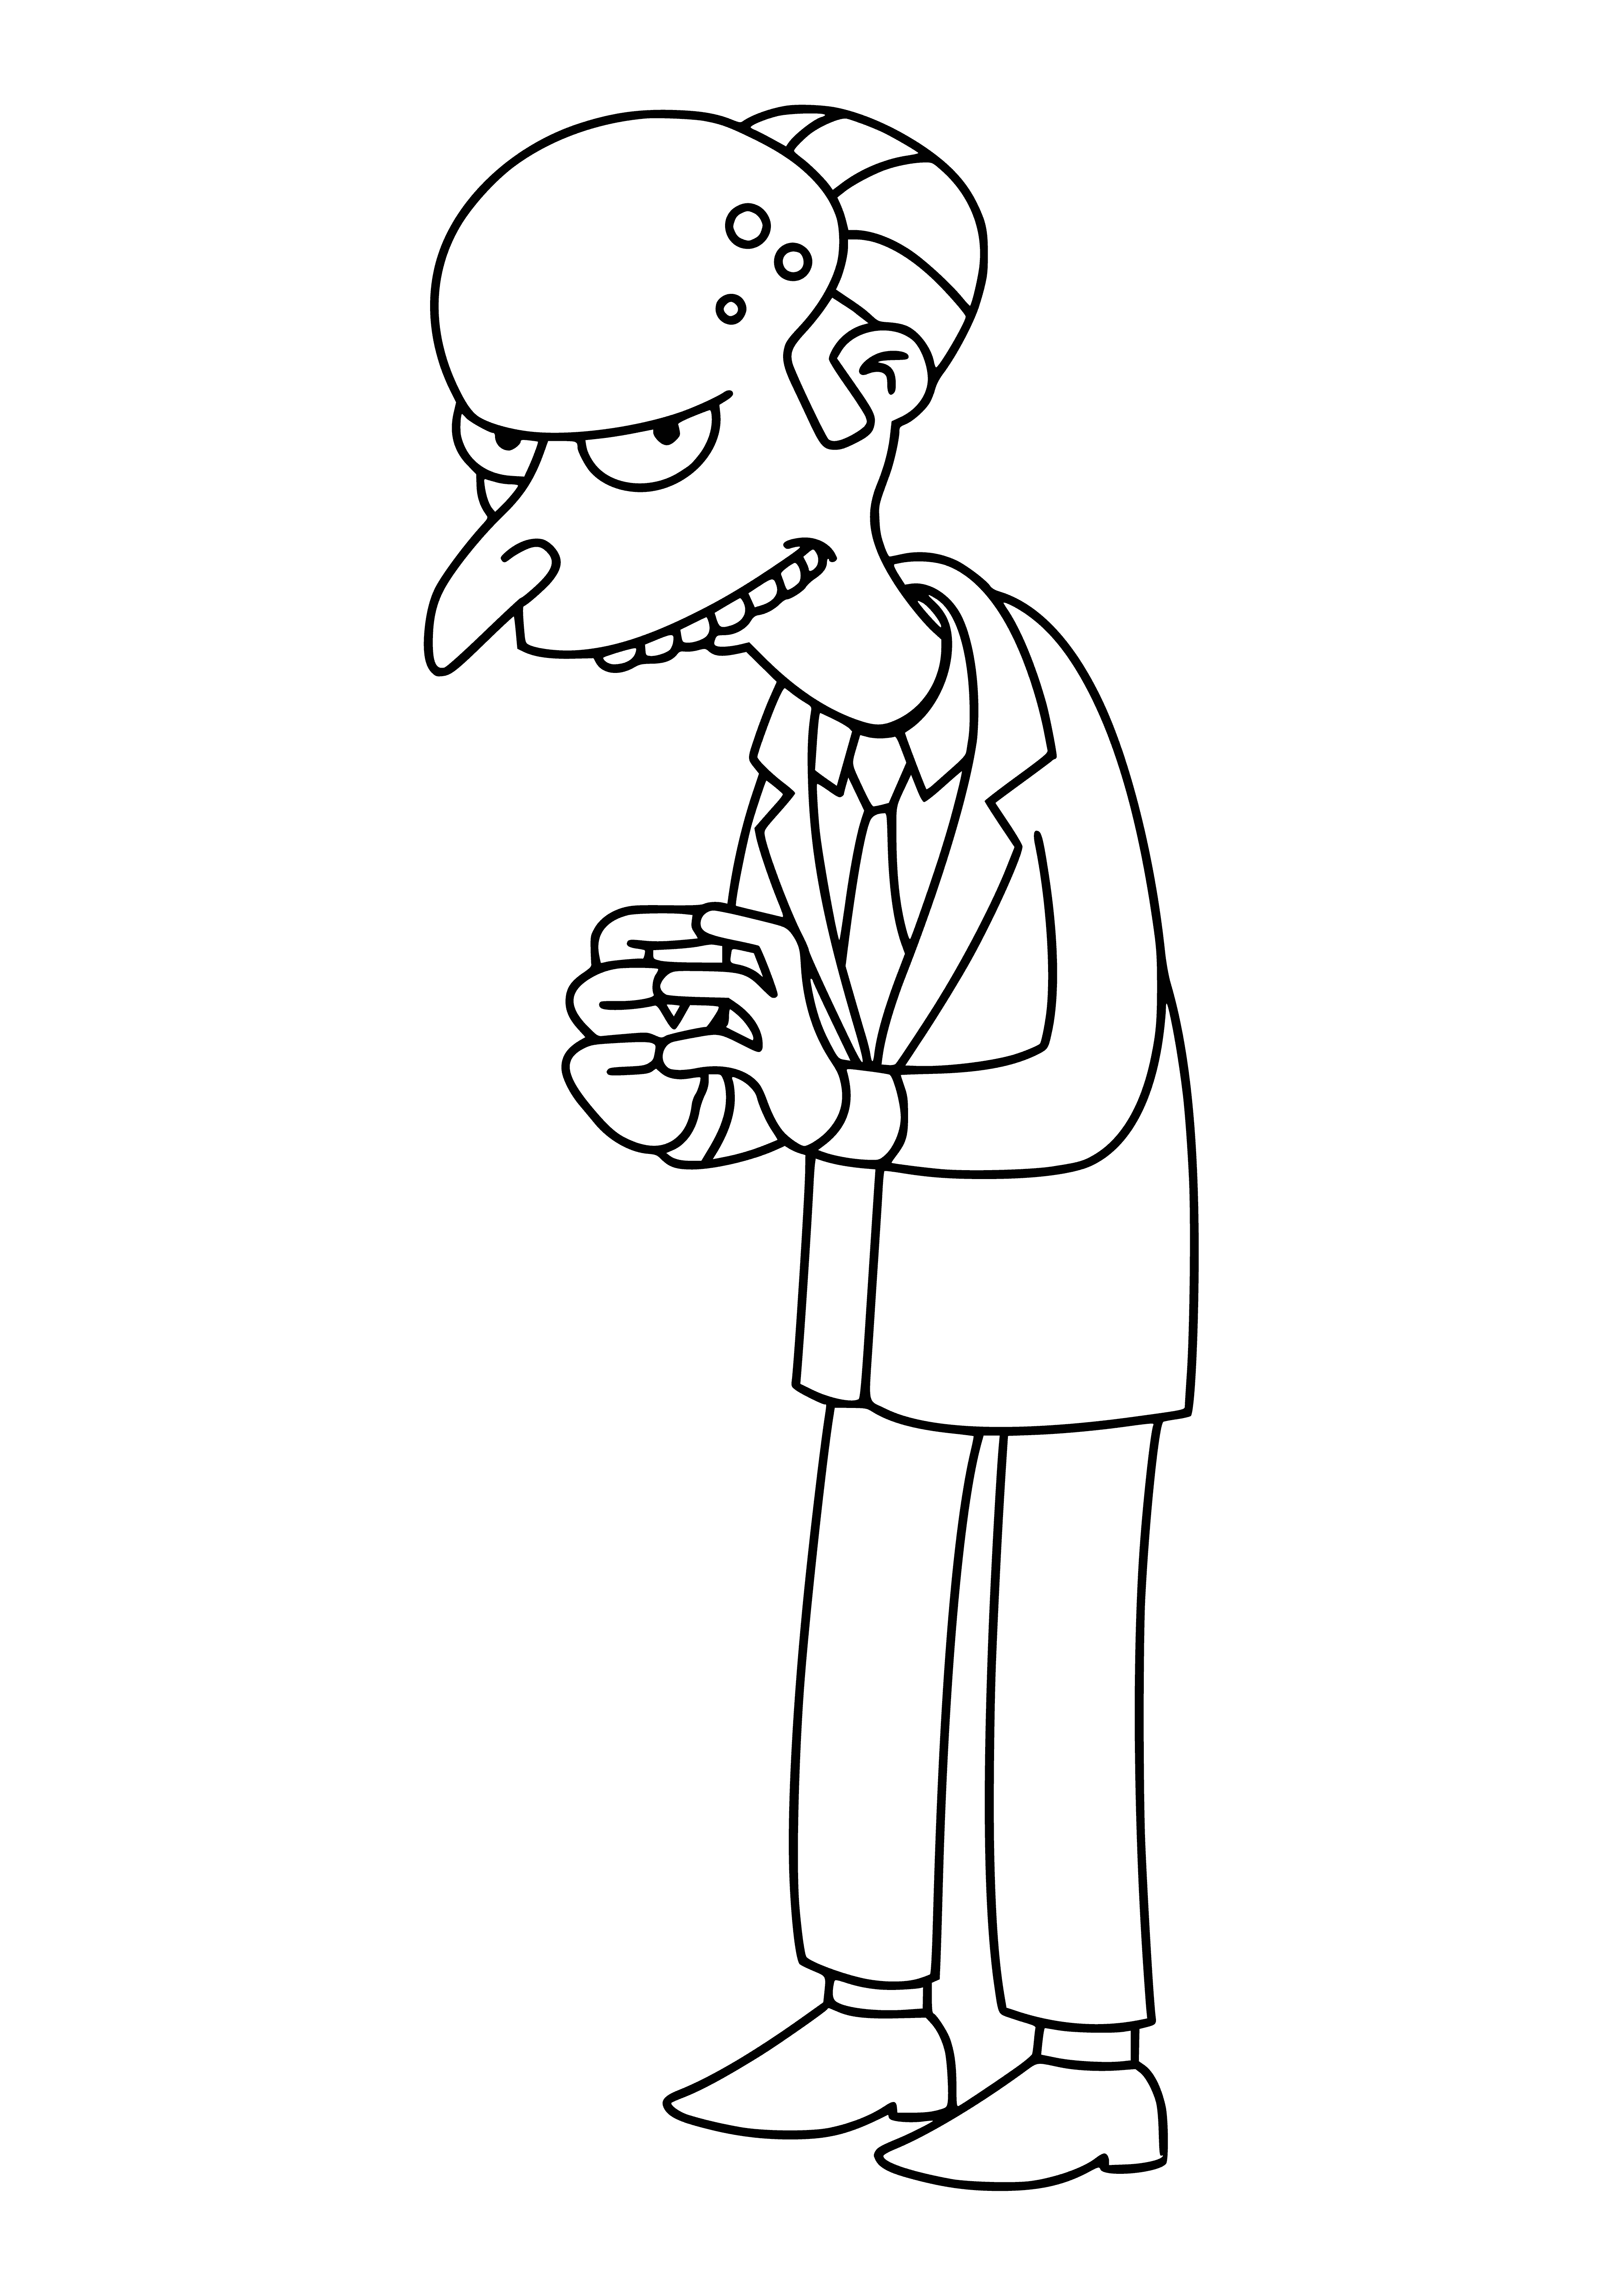 Mister burns coloring page